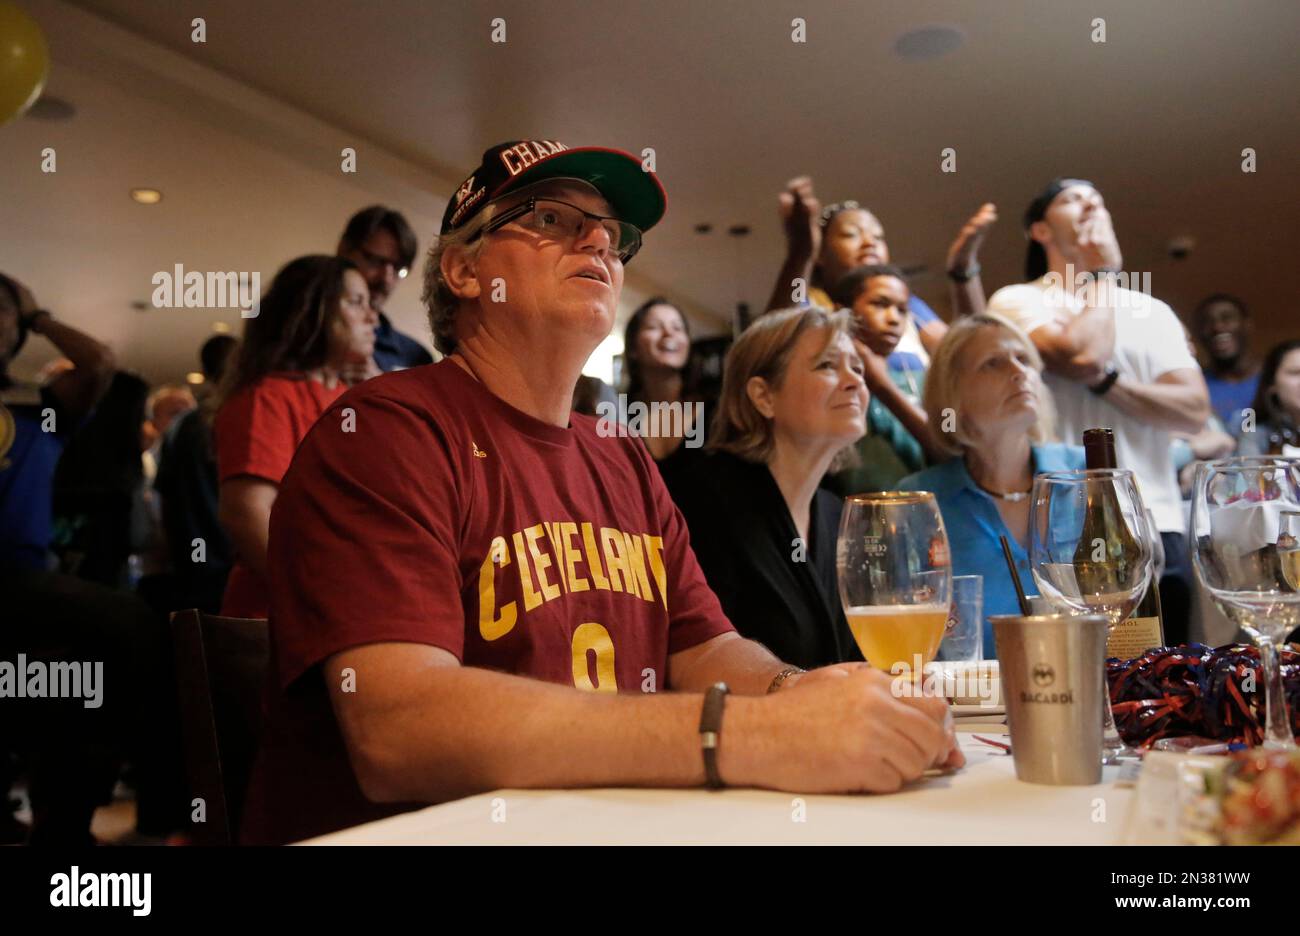 Randy Chiotti shows support for Dellavedova during a watch party for game 3 of the NBA finals at the 1515 Restaurant in Walnut Creek, Calif., on Tues. June 9, 2015